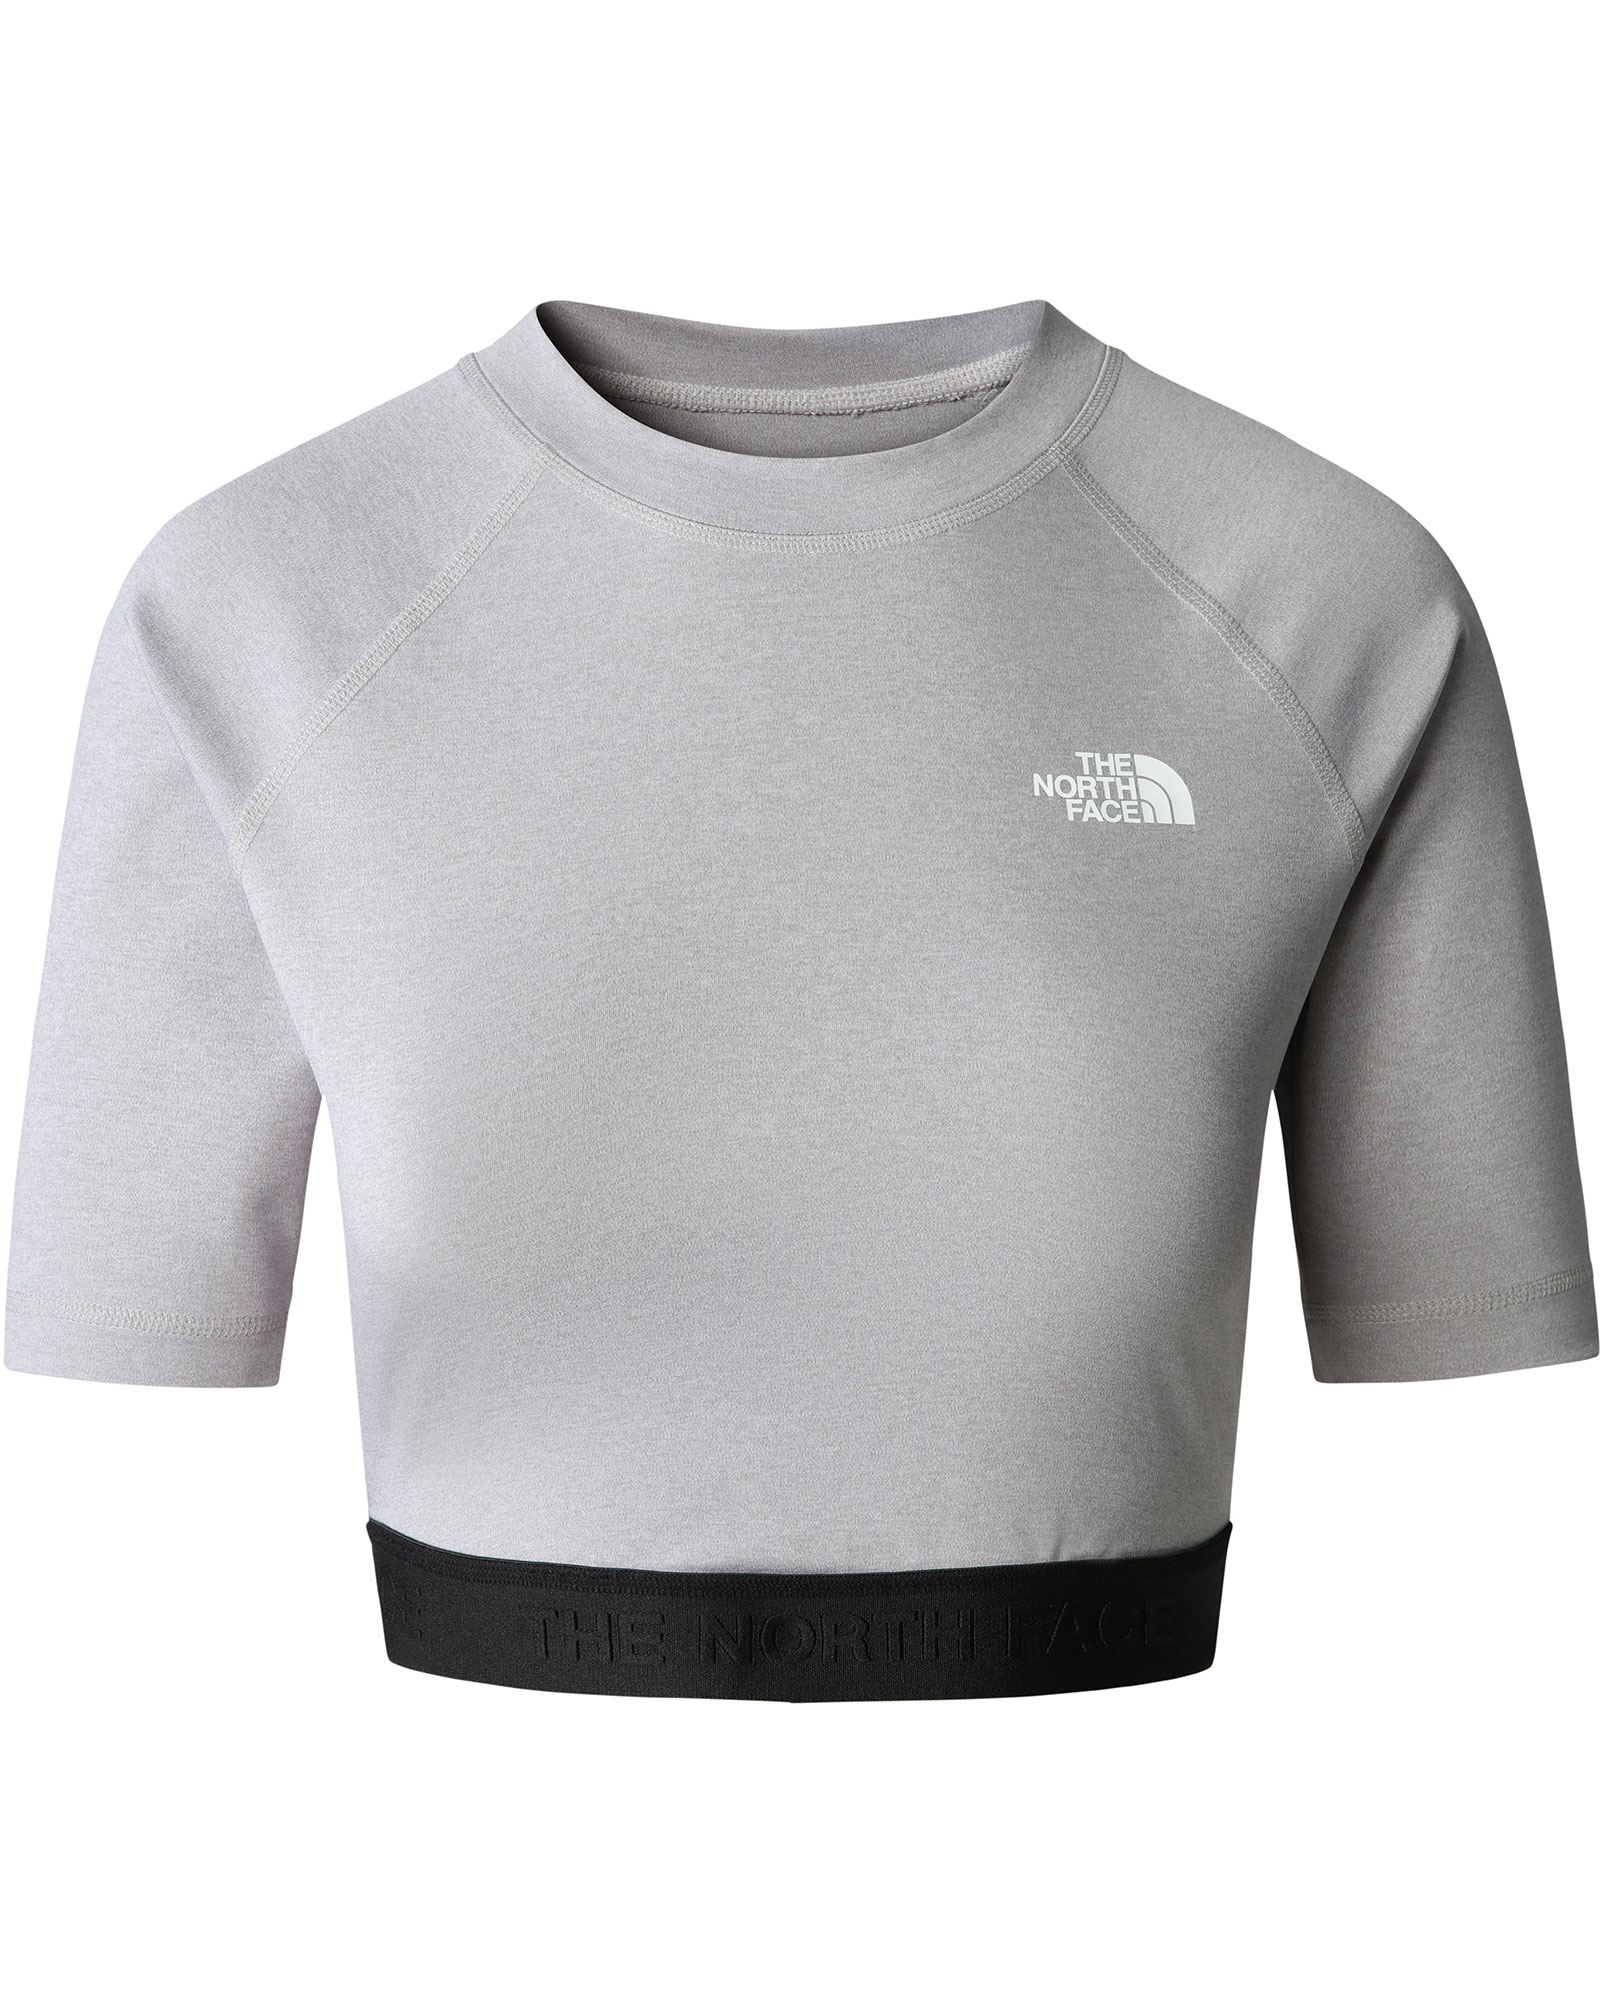 The North Face Womens Crop Performance T-shirt